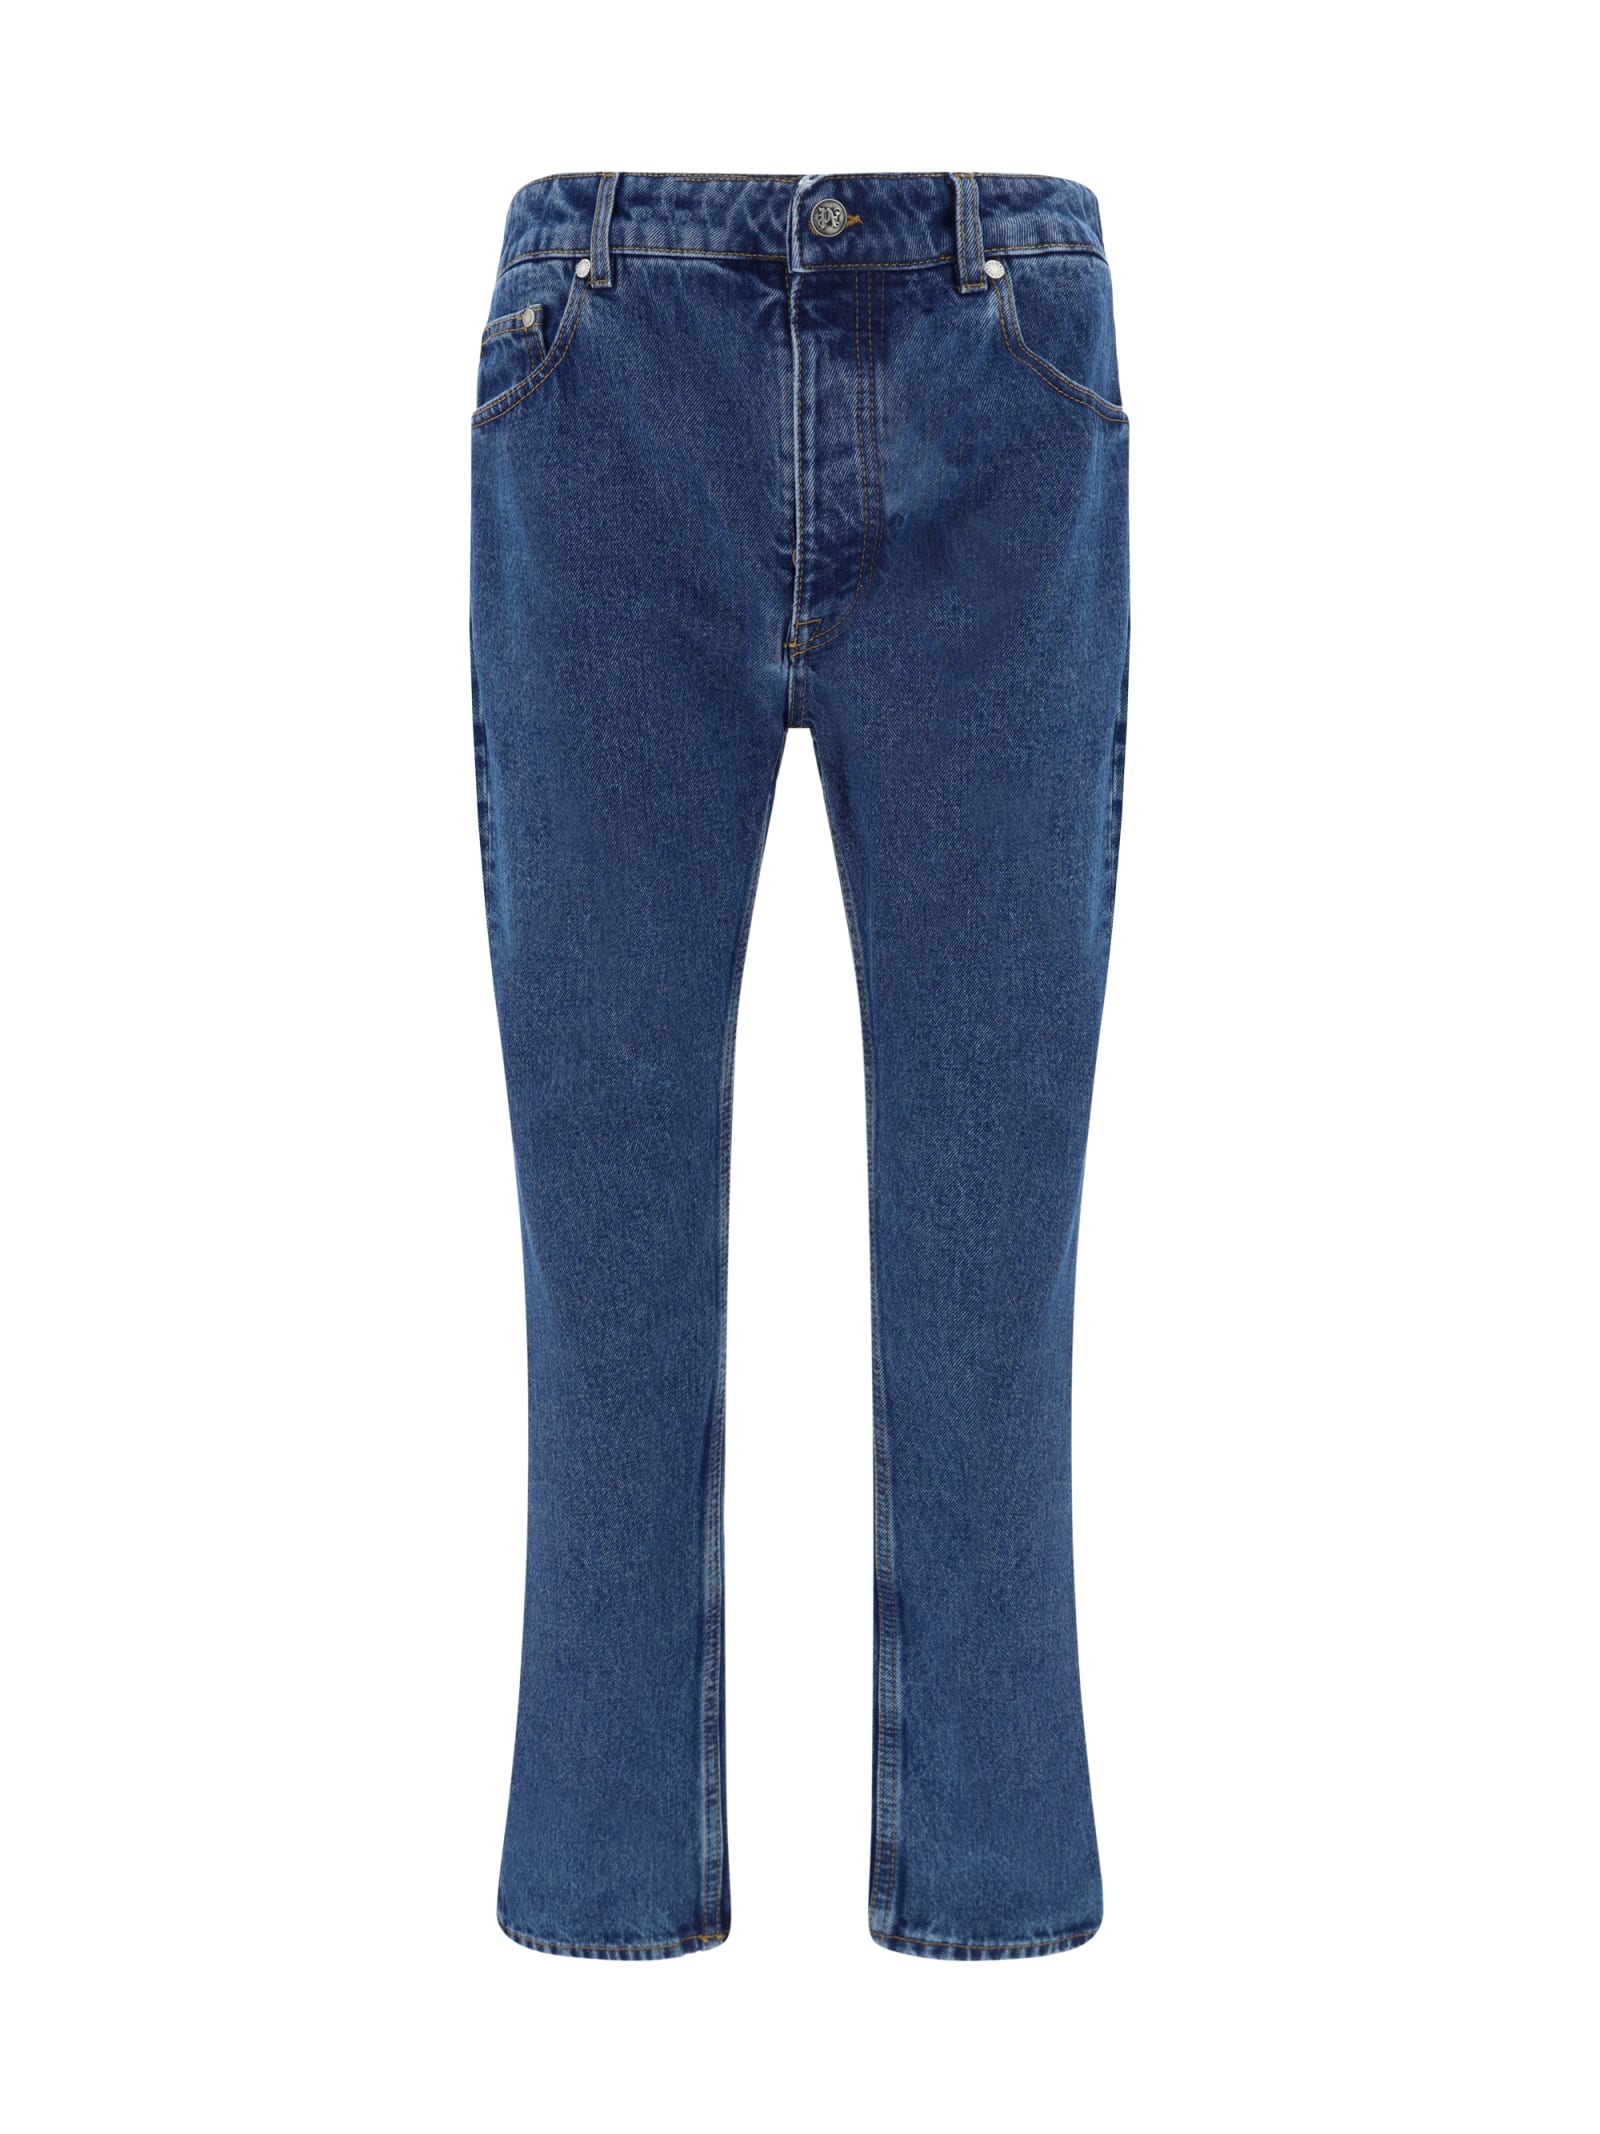 Palm Angels Jeans In Denim Blue